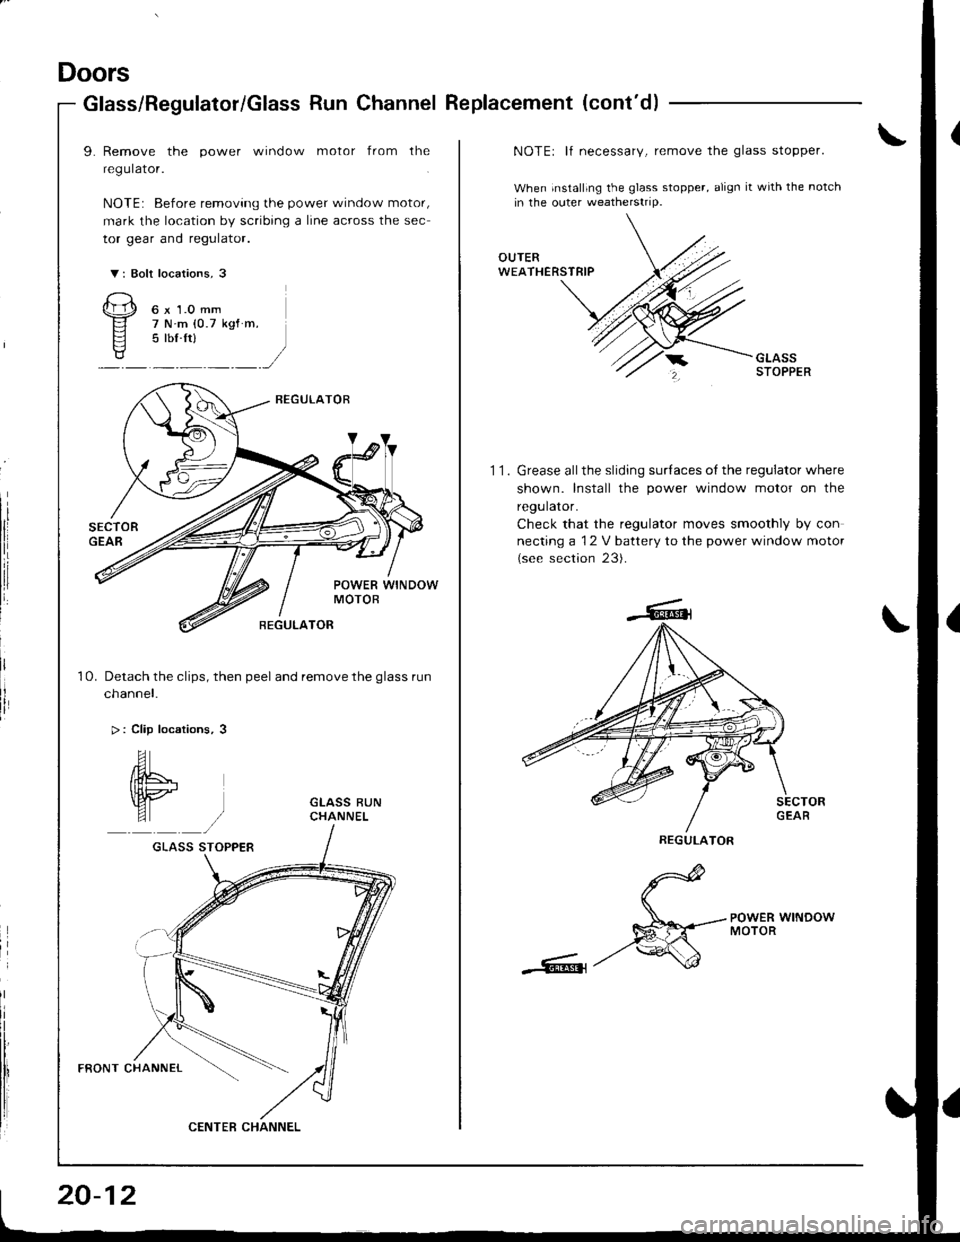 ACURA INTEGRA 1998  Service Repair Manual Doors
Glass/Regulator/Glass Run Channel Replacement (contd)
9. Remove the power window motor from the
regulator.
NOTE: Before removing the power window motor,
mark the location by scribing a line acr